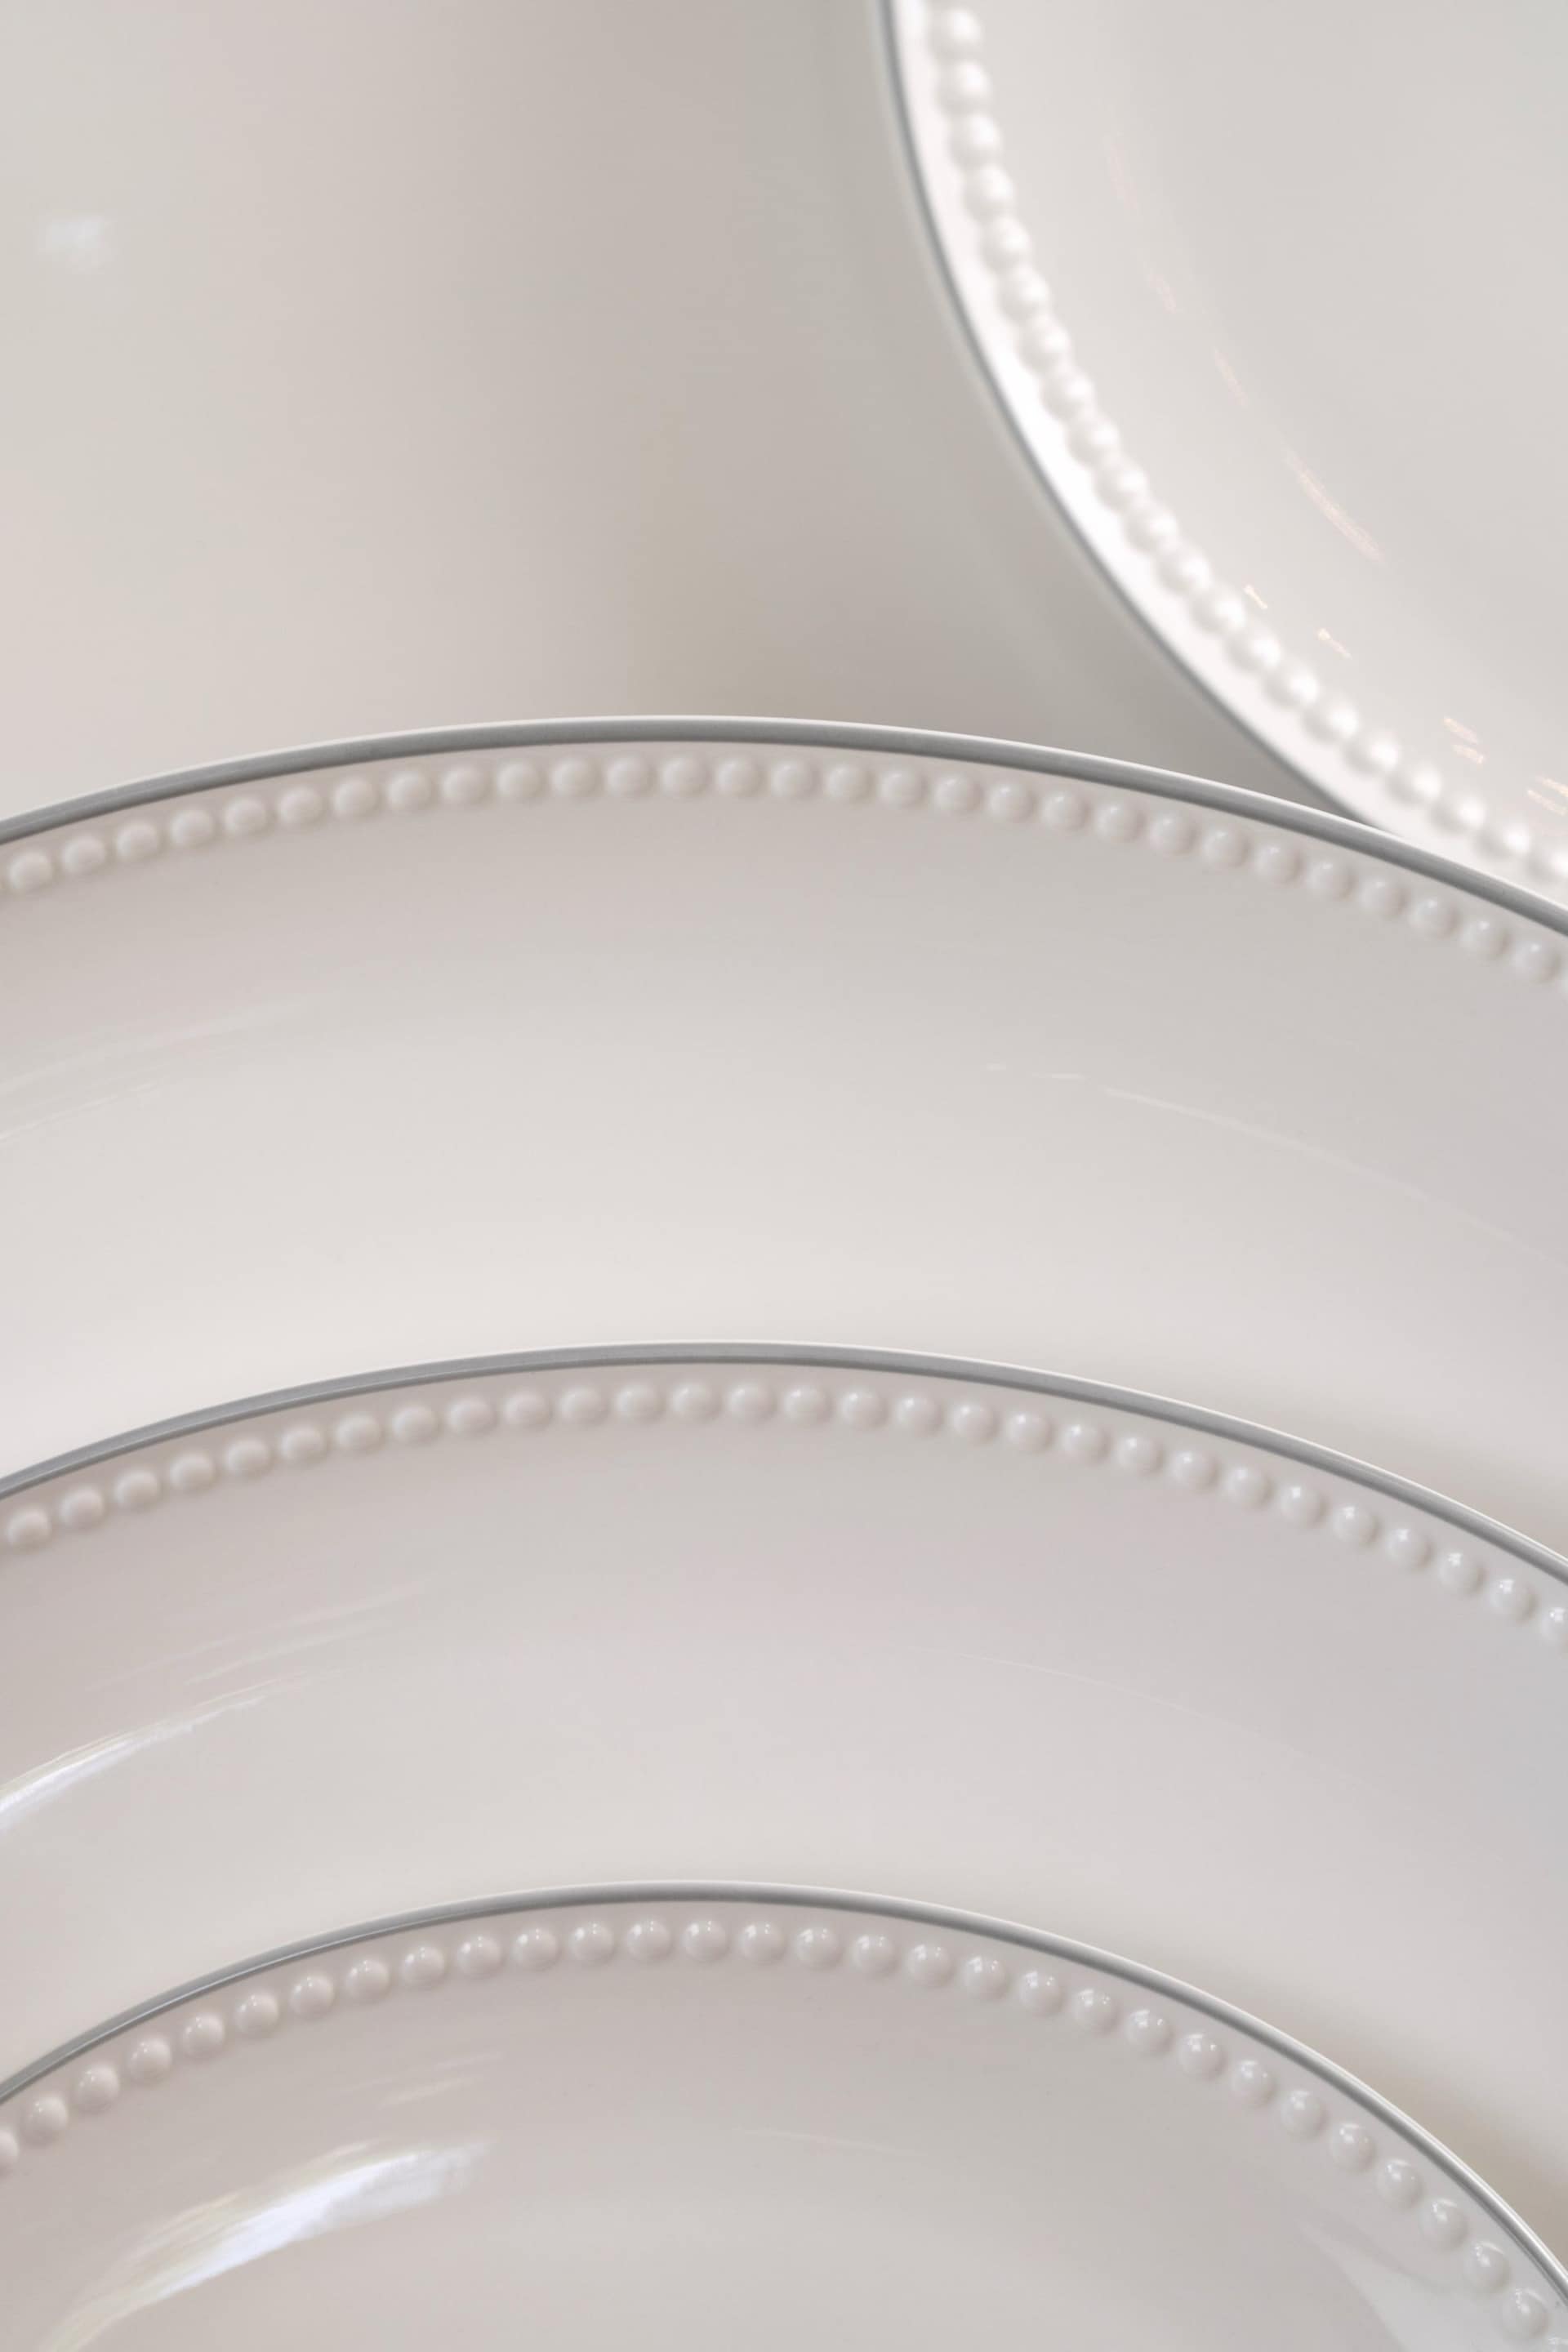 Mary Berry 16 Piece White Signature Dinner Set - Image 2 of 4